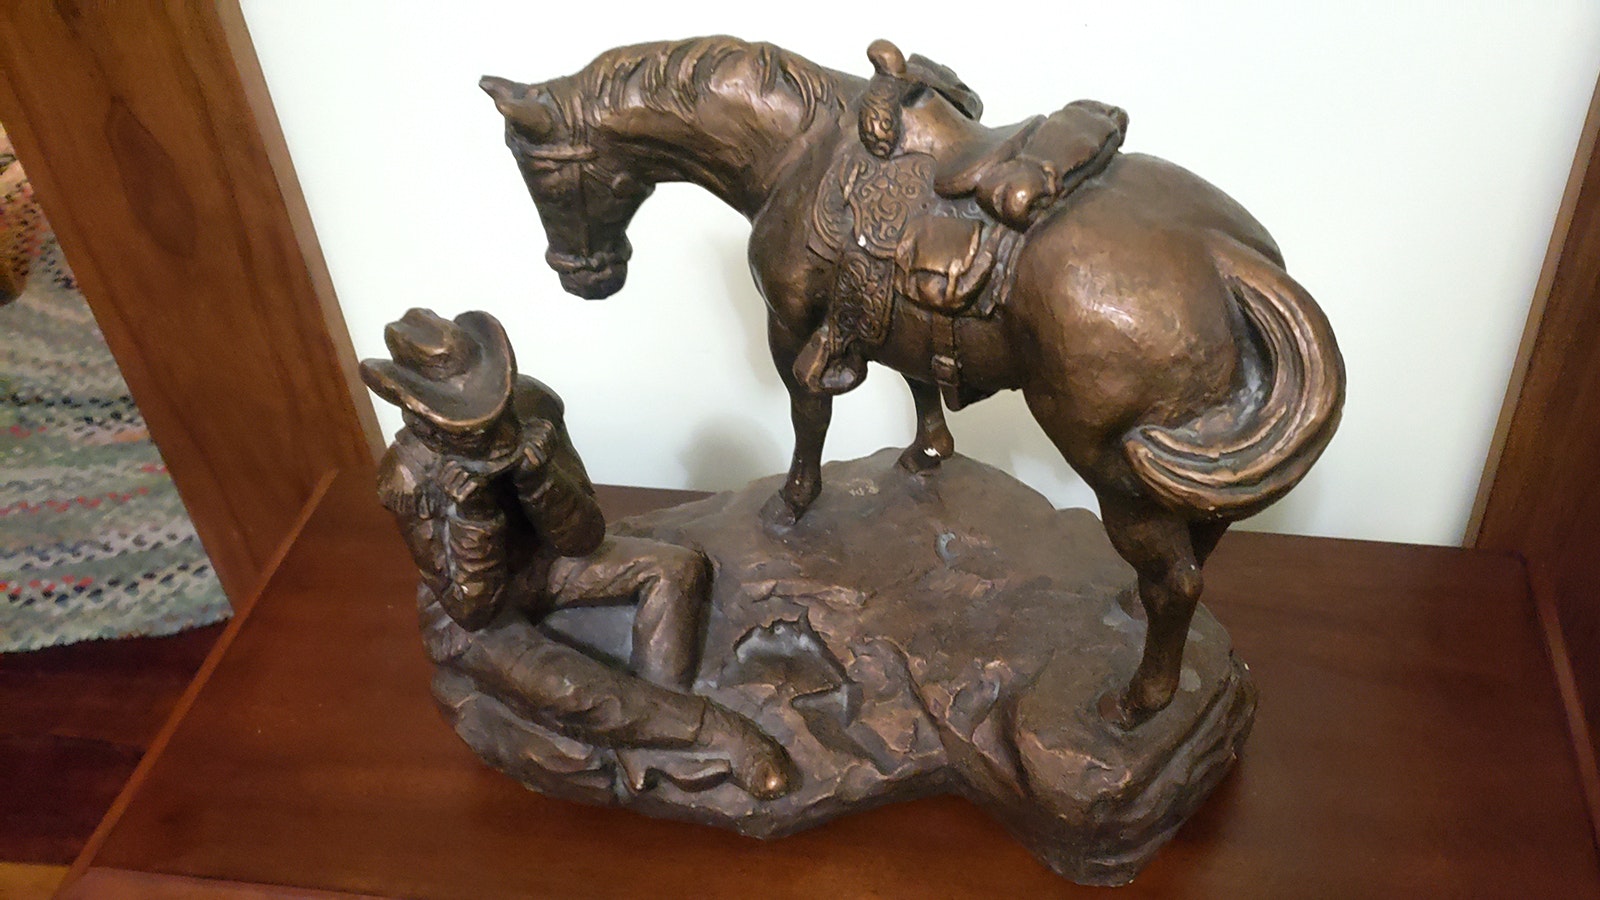 A bronze sculpture in the Nate Champion room.